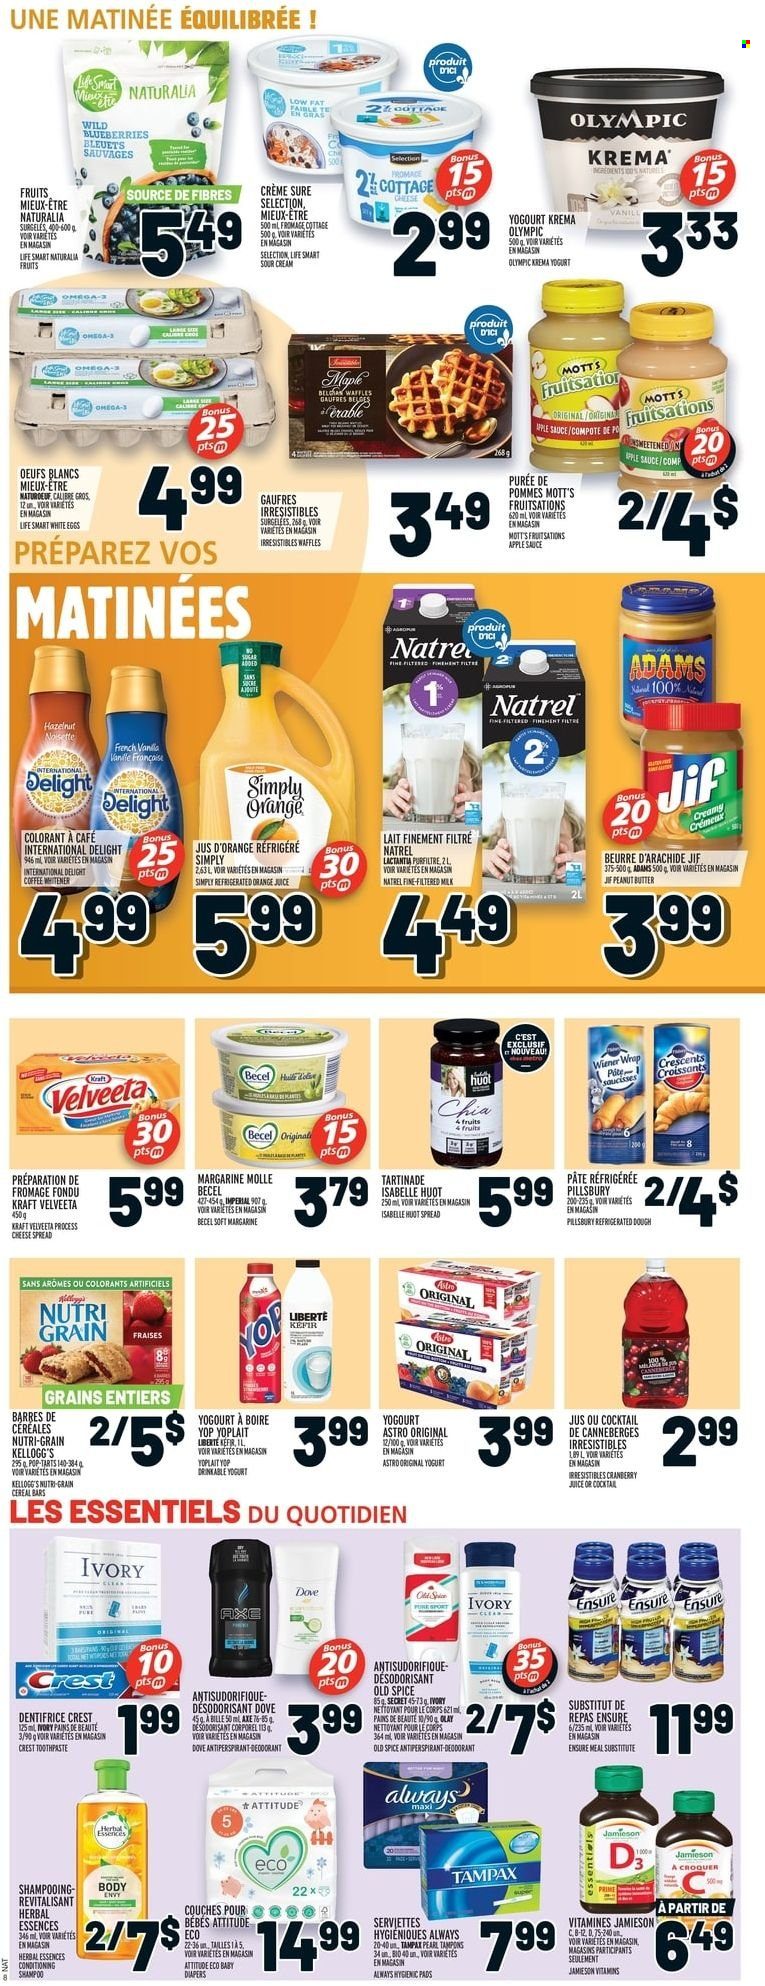 thumbnail - Metro Flyer - January 20, 2022 - January 26, 2022 - Sales products - waffles, blueberries, Mott's, sauce, Pillsbury, Kraft®, cheese spread, yoghurt, Yoplait, kefir, margarine, sour cream, Kellogg's, compote, cereals, Nutri-Grain, spice, apple sauce, peanut butter, Jif, cranberry juice, orange juice, juice, coffee, nappies, toothpaste, Crest, tampons, Olay, Herbal Essences, anti-perspirant, Sure, Dove, shampoo, Tampax, Old Spice. Page 10.